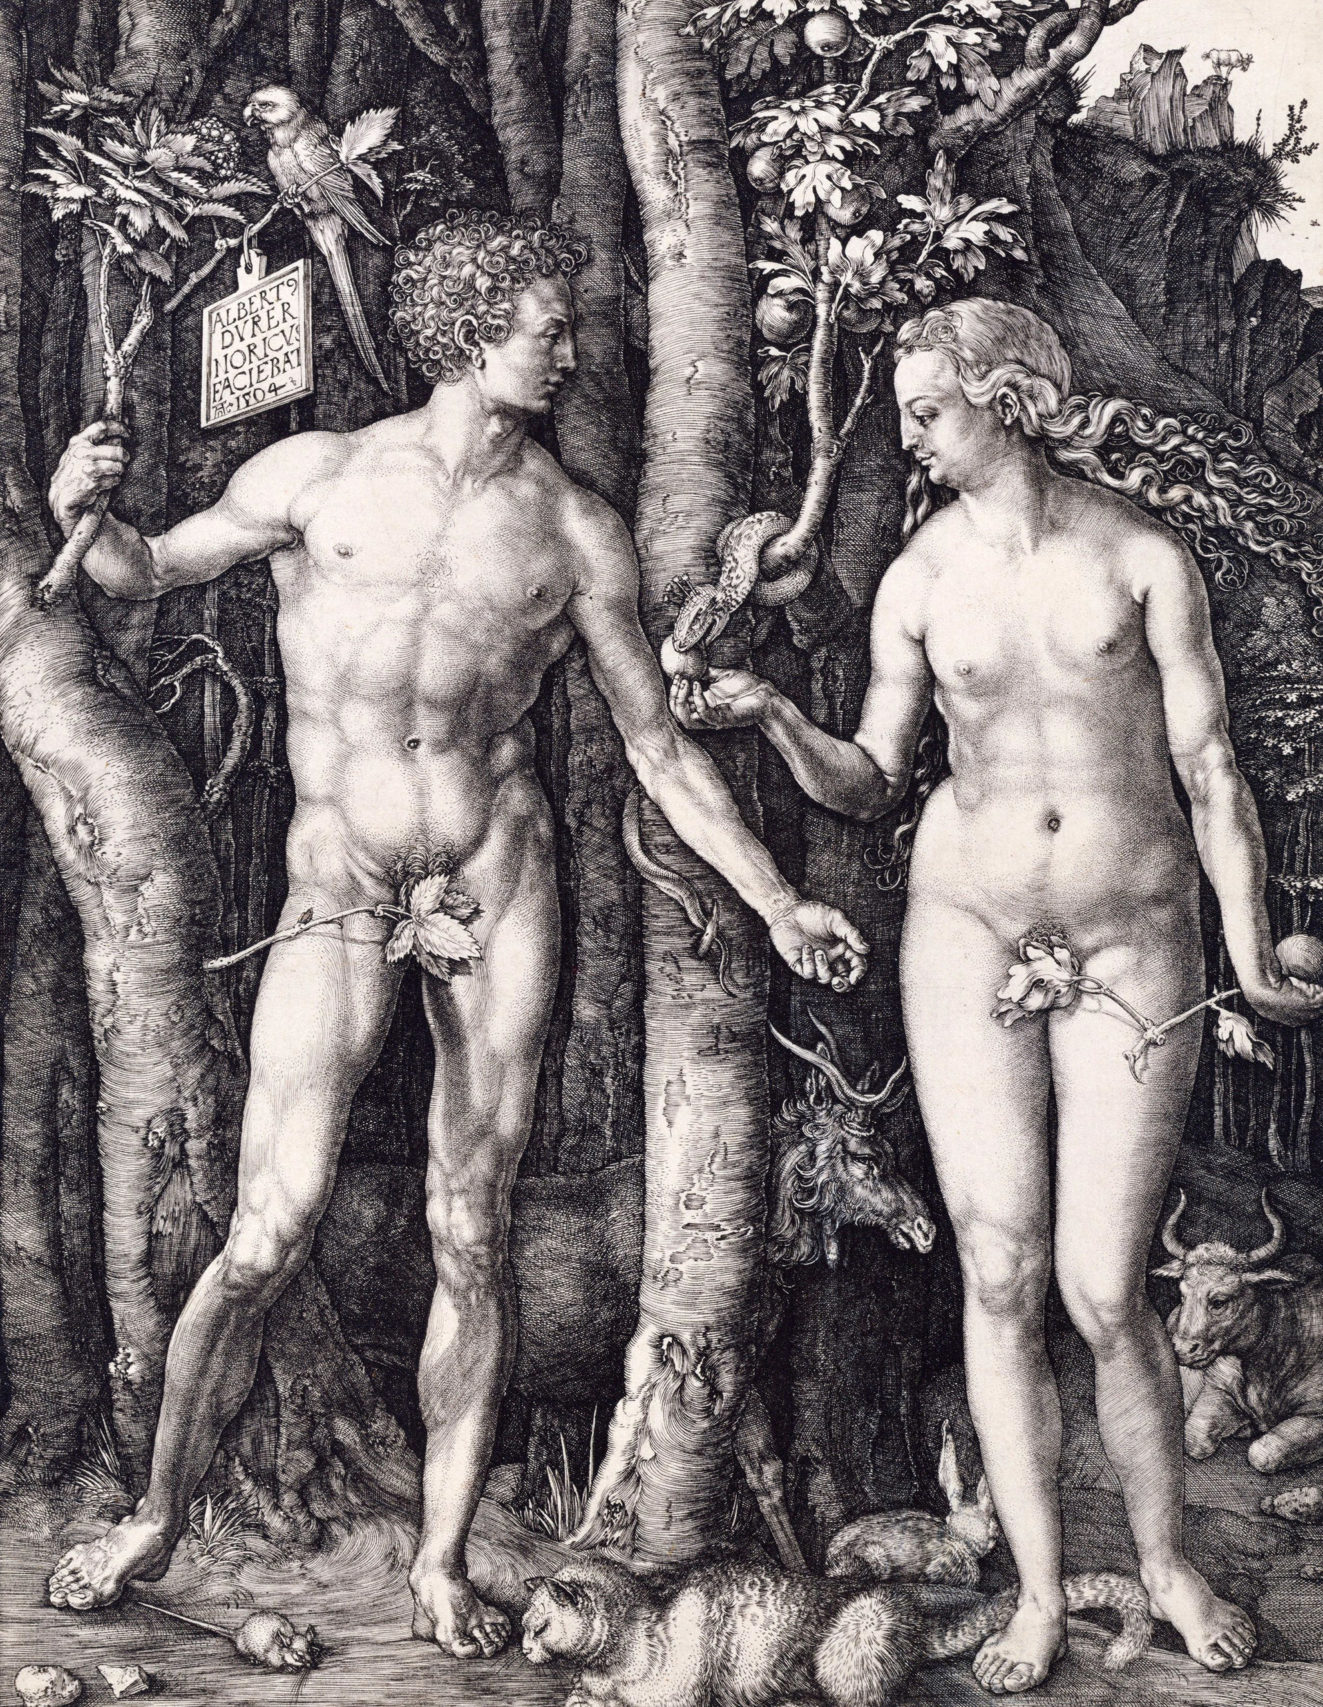 Adam and Eve standing on either side of the tree of knowledge with the serpent. In the foreground a cat.